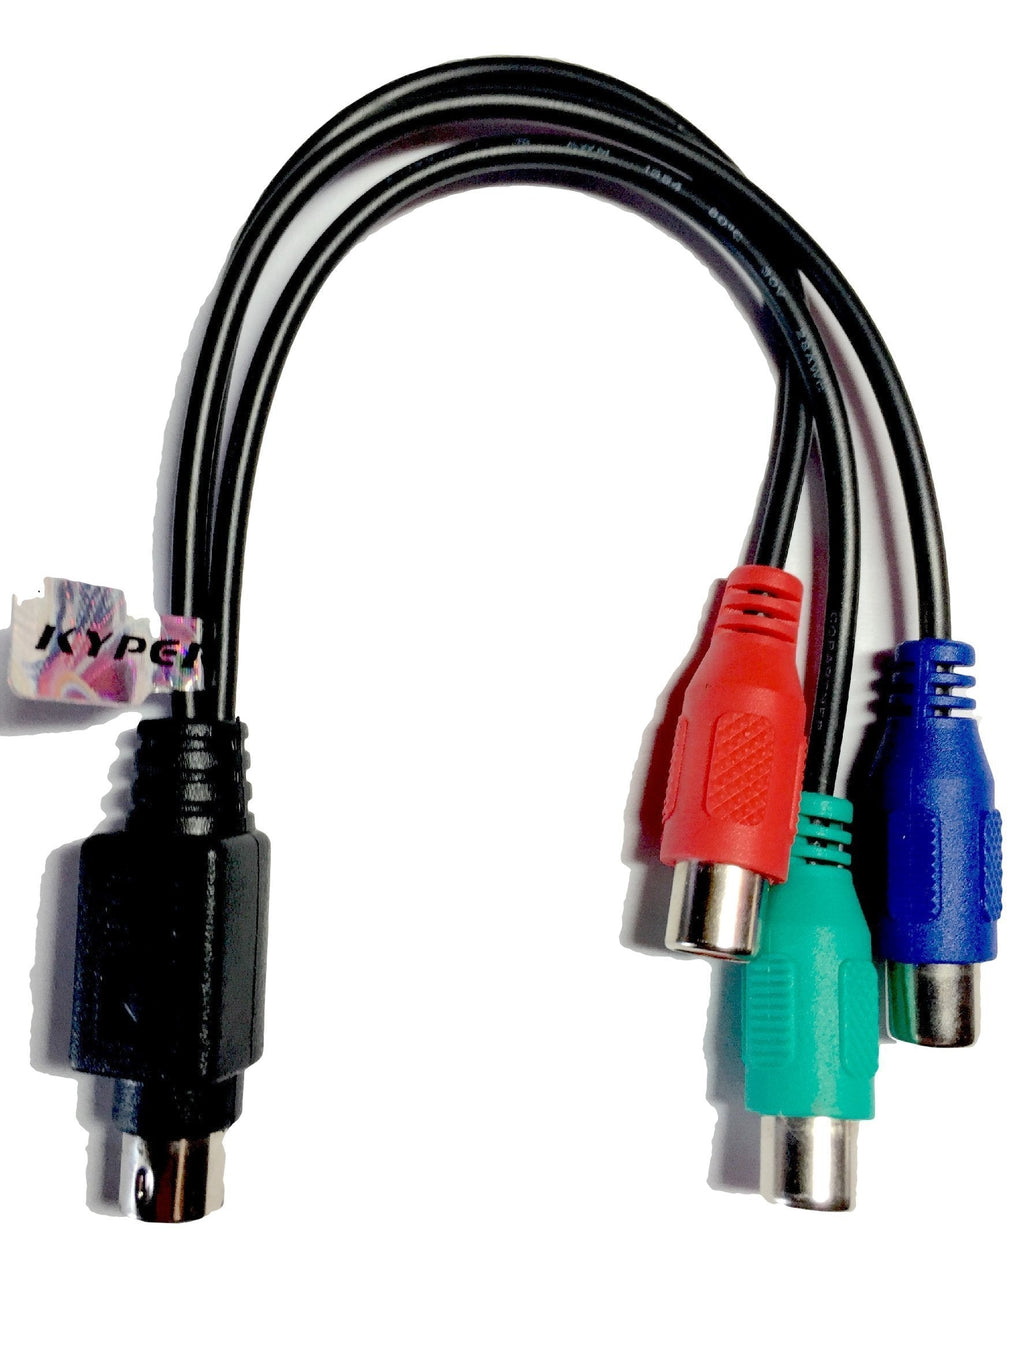 Kyper 7-Pin S-Video to HDTV / 3 RCA RGB (Red, Blue, & Green) Component HDTV Video Cable